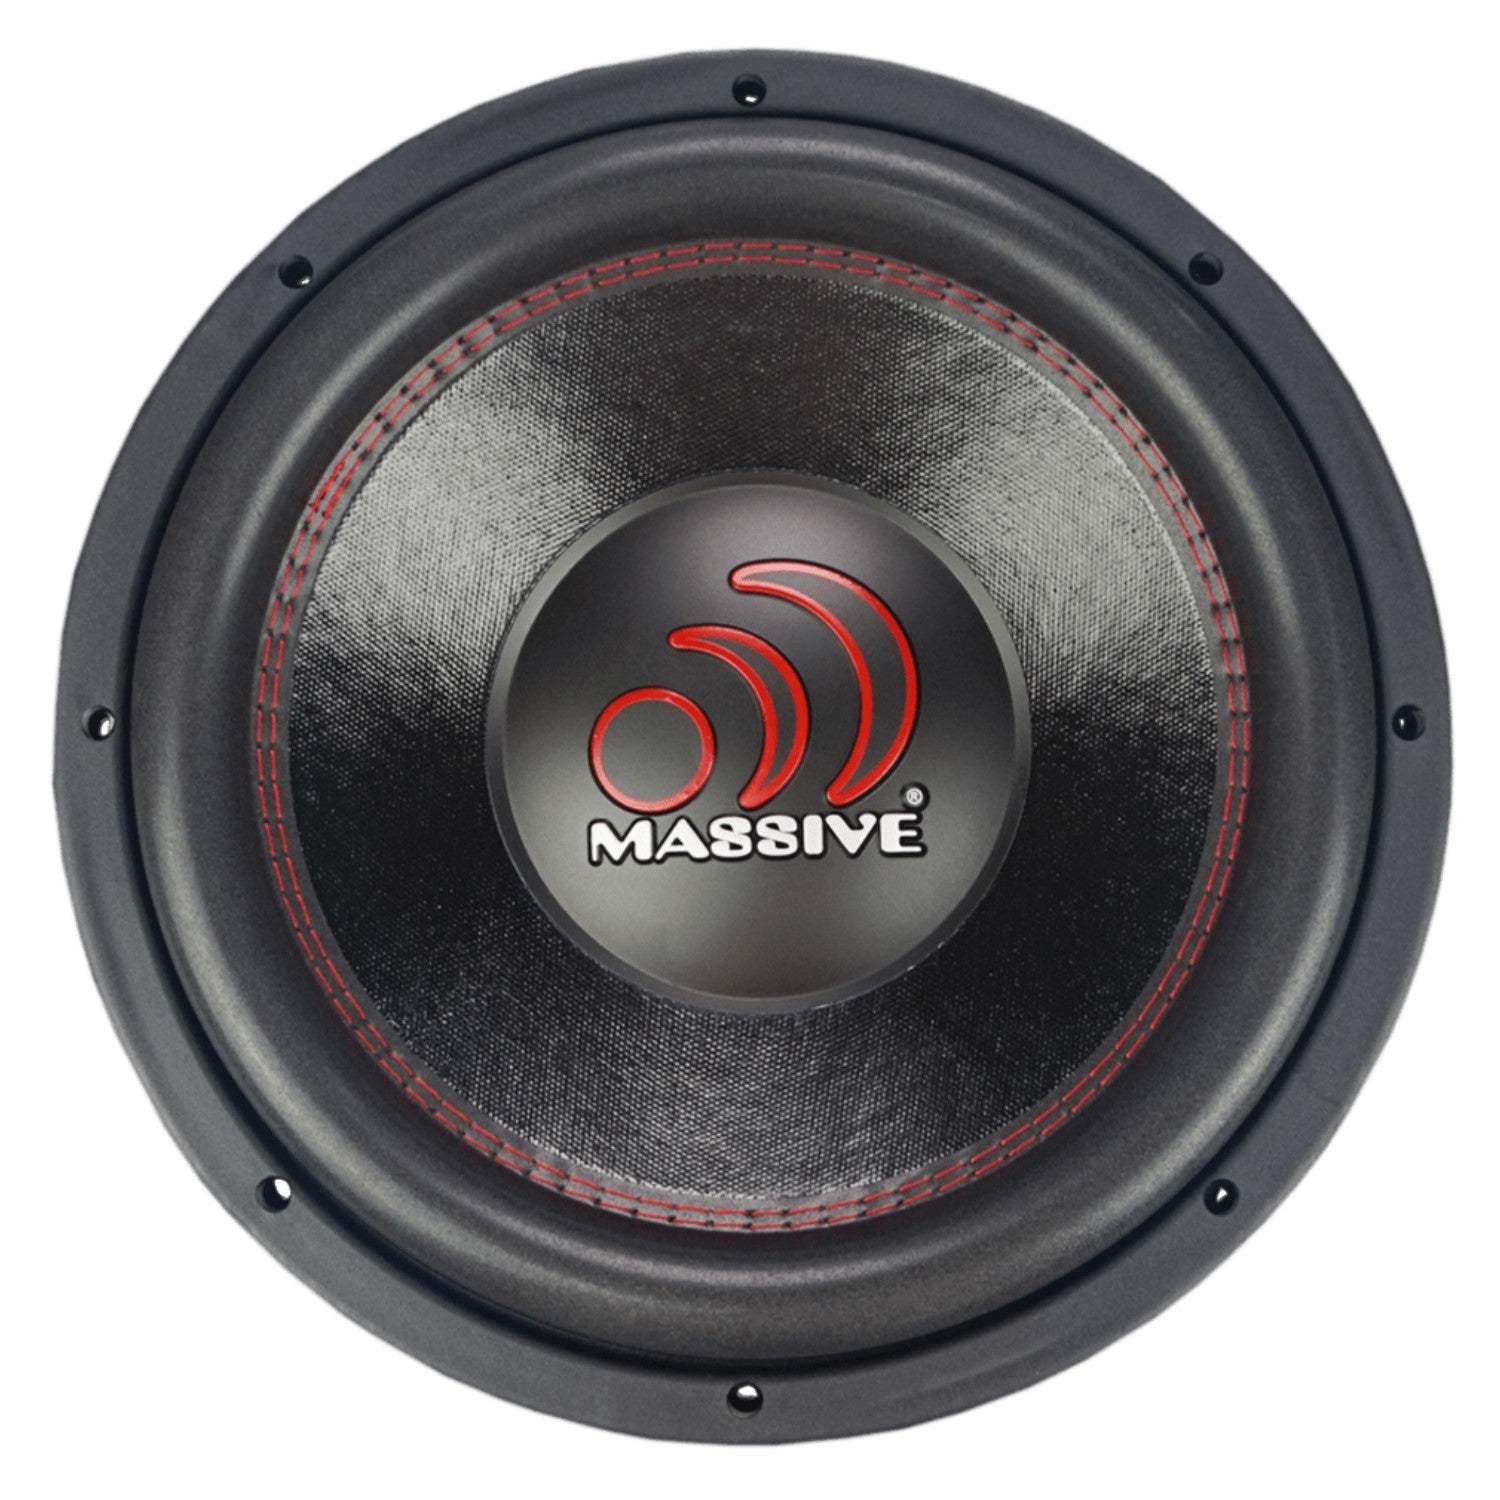 GTX122 - 12" 700 Watts RMS Dual 2 Ohm Subwoofer